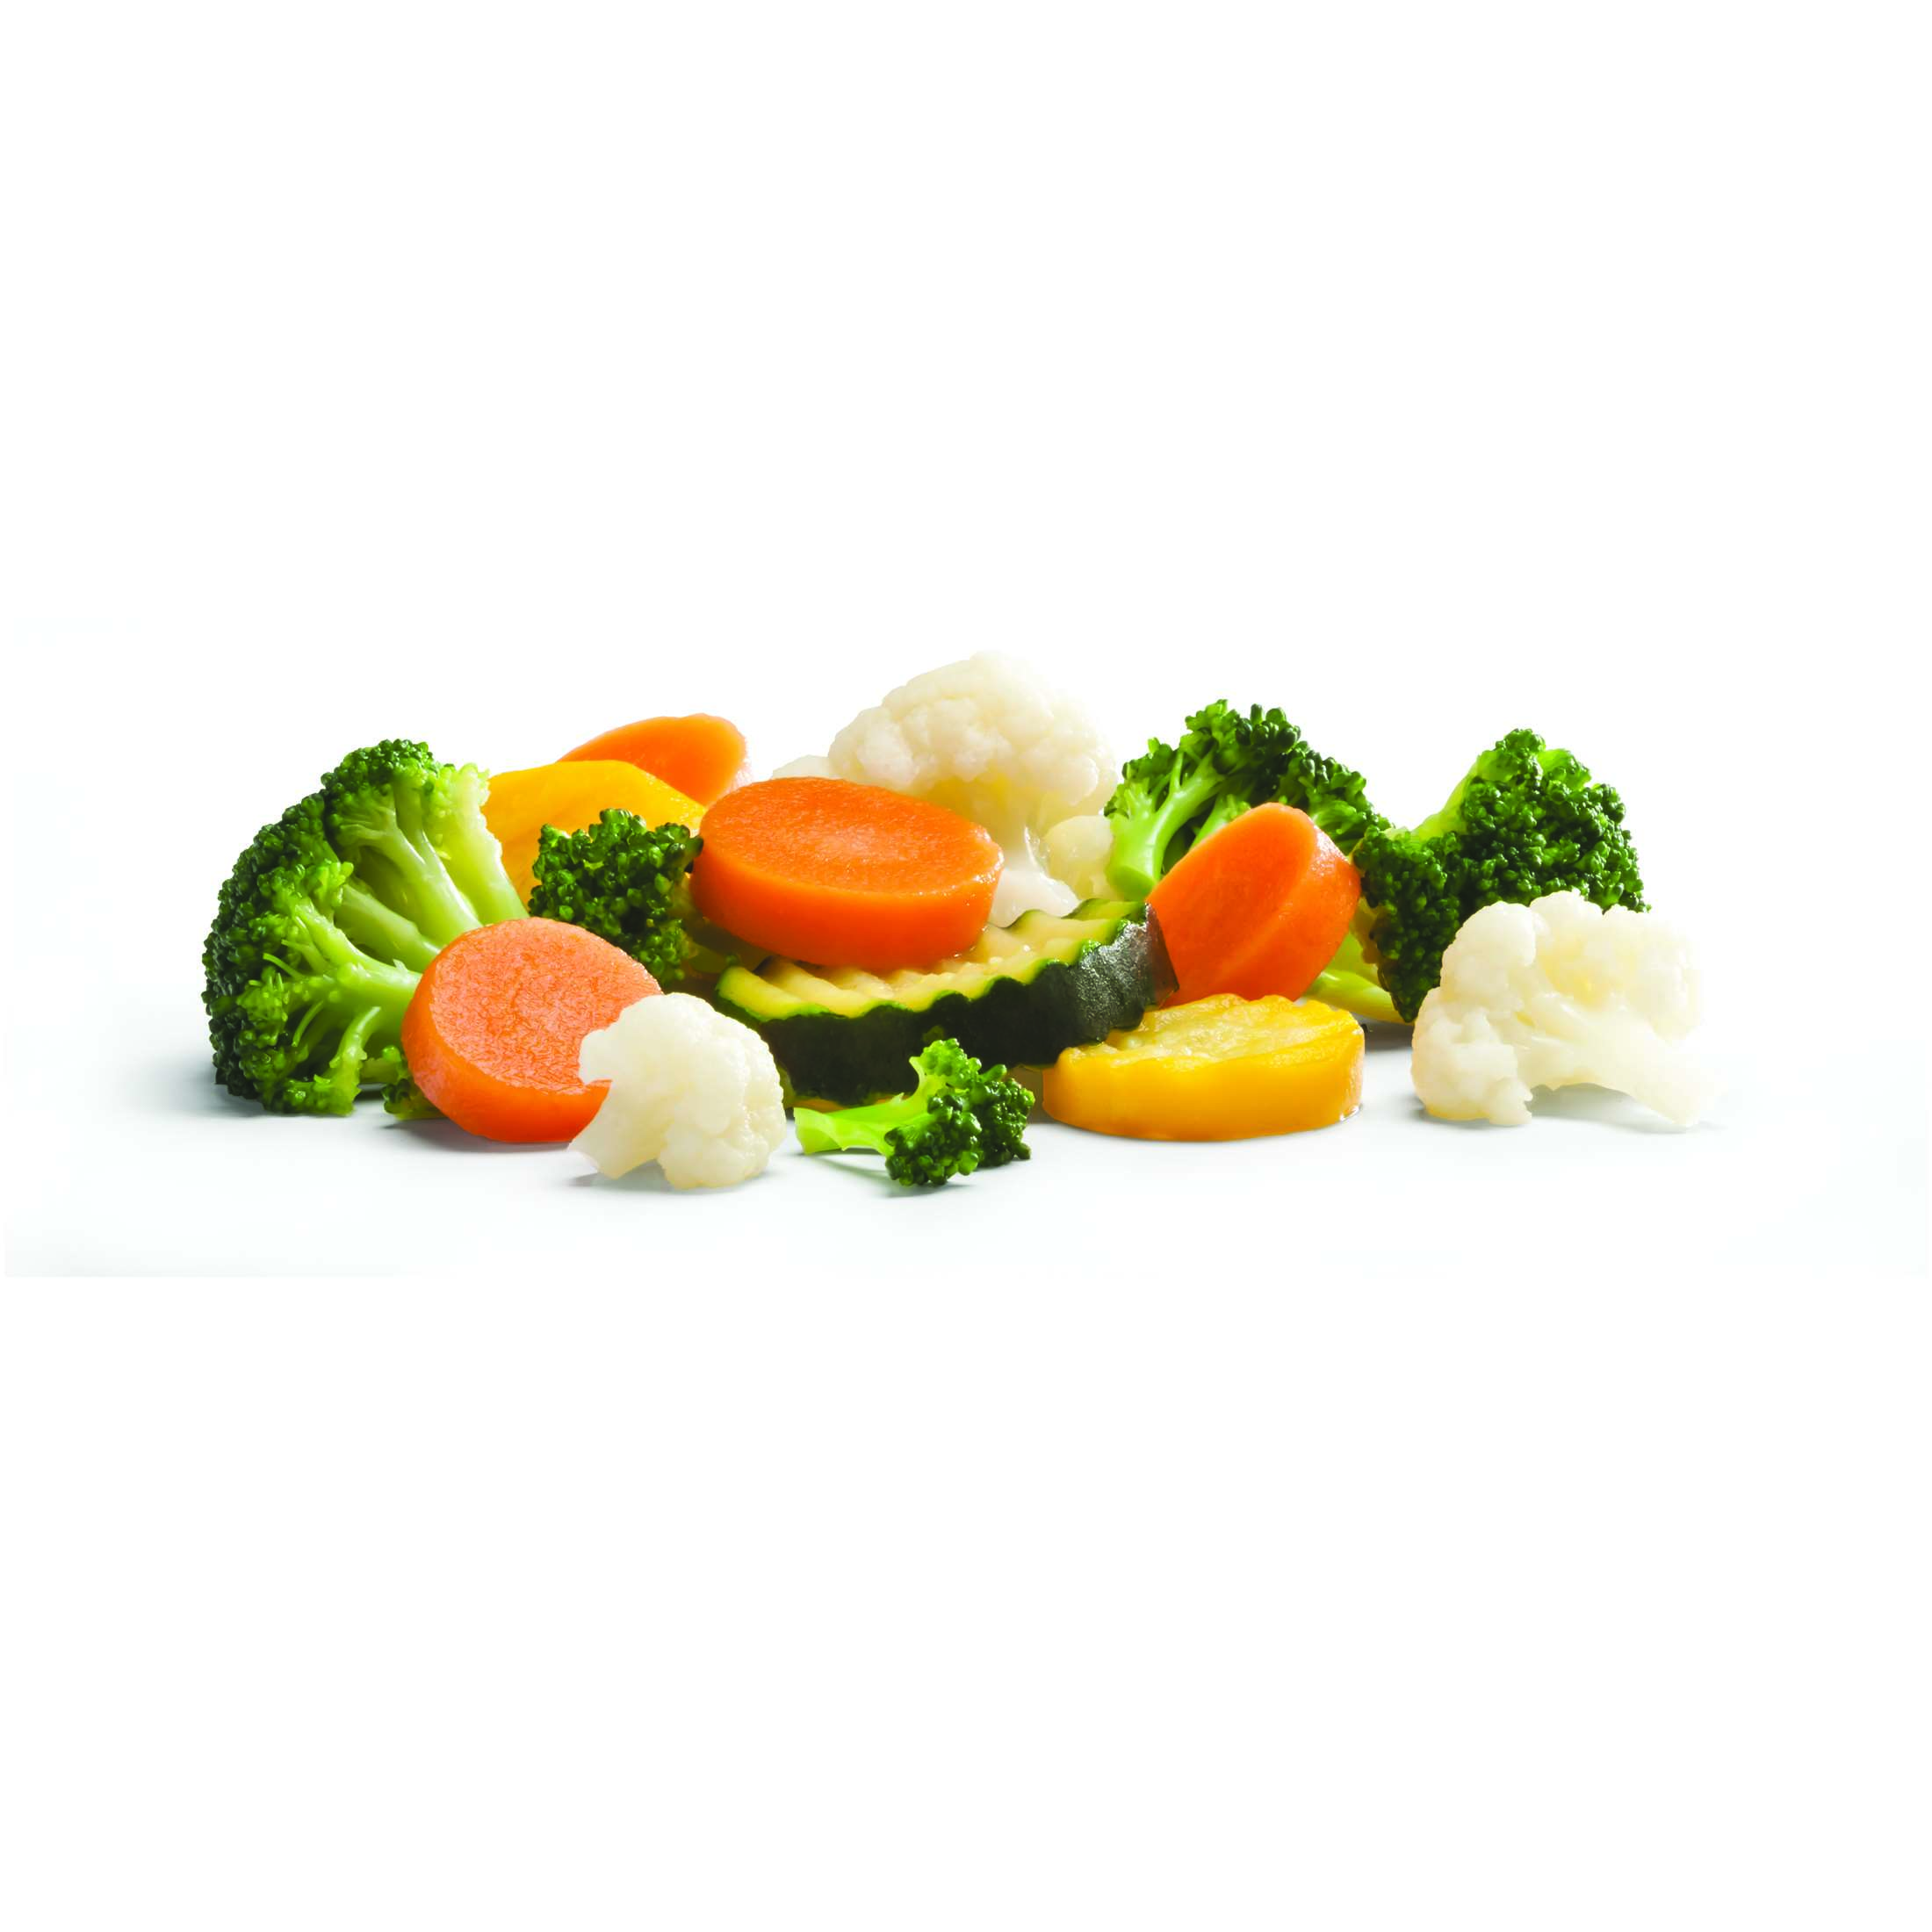 Vegetables Classic Normandy Blend 8/3lb - Sold by EA